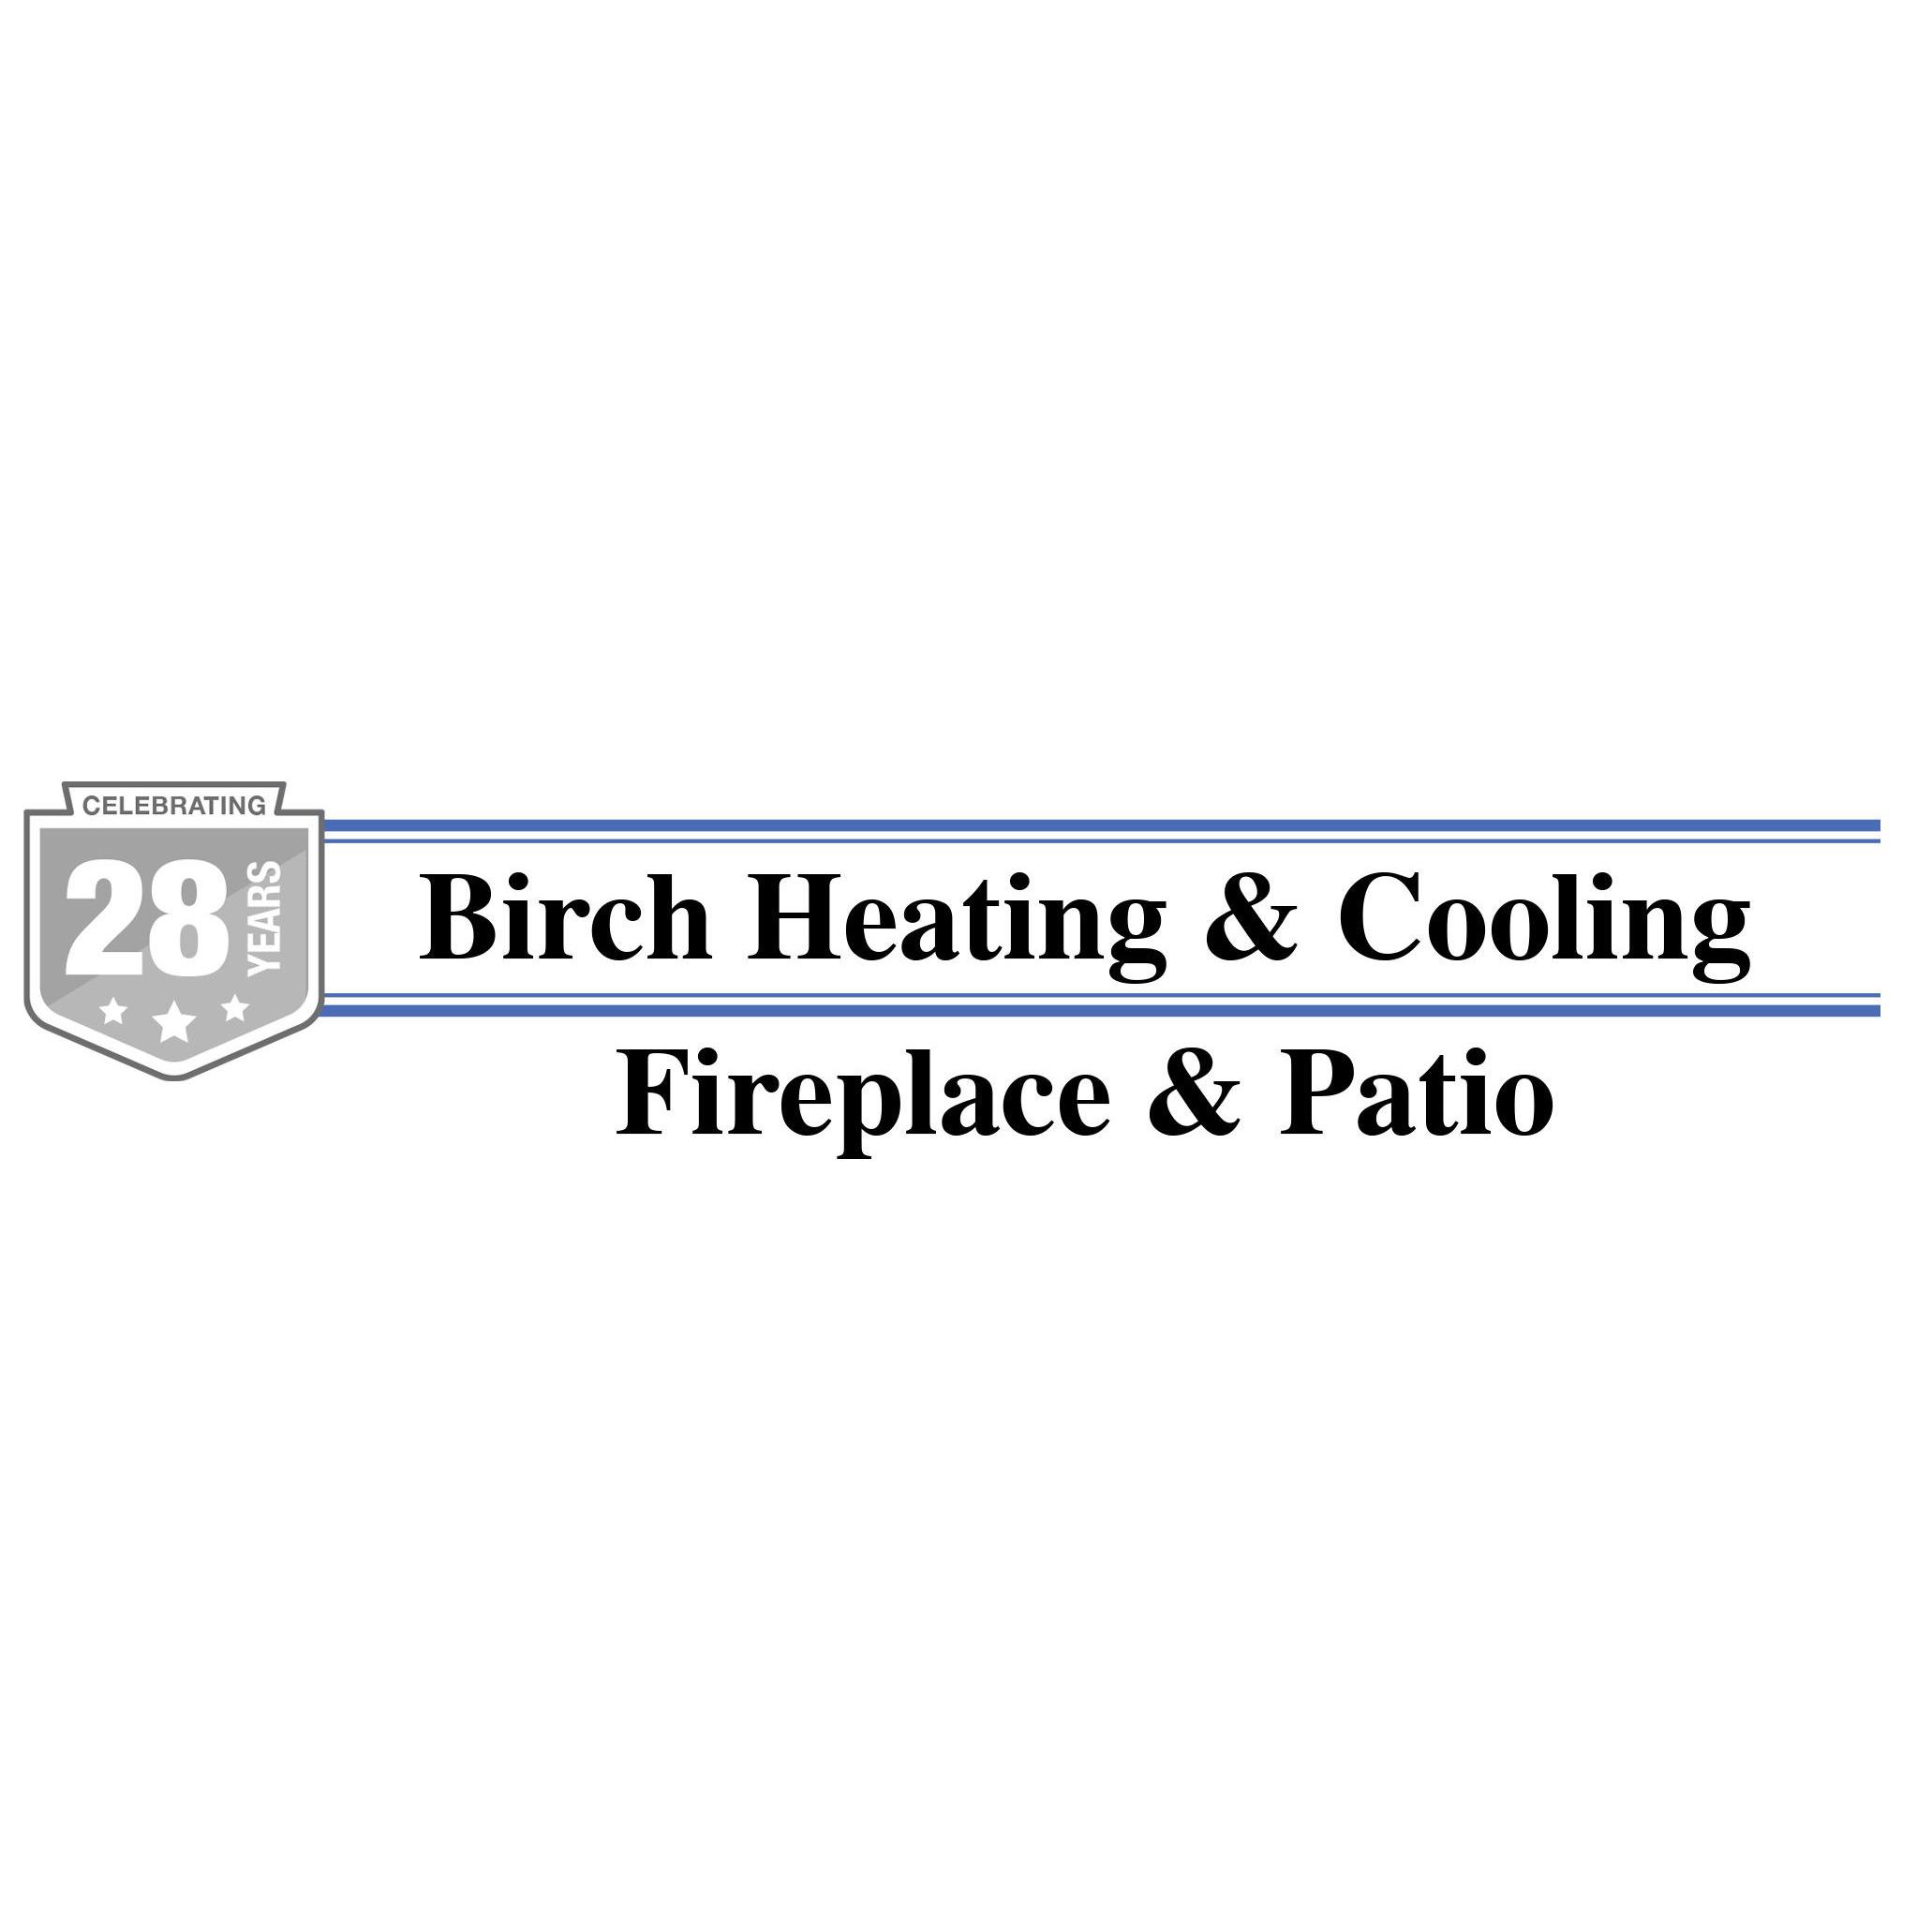 Birch Heating and Cooling Fireplace and Patio - Dubuque, IA 52003 - (563)500-2087 | ShowMeLocal.com